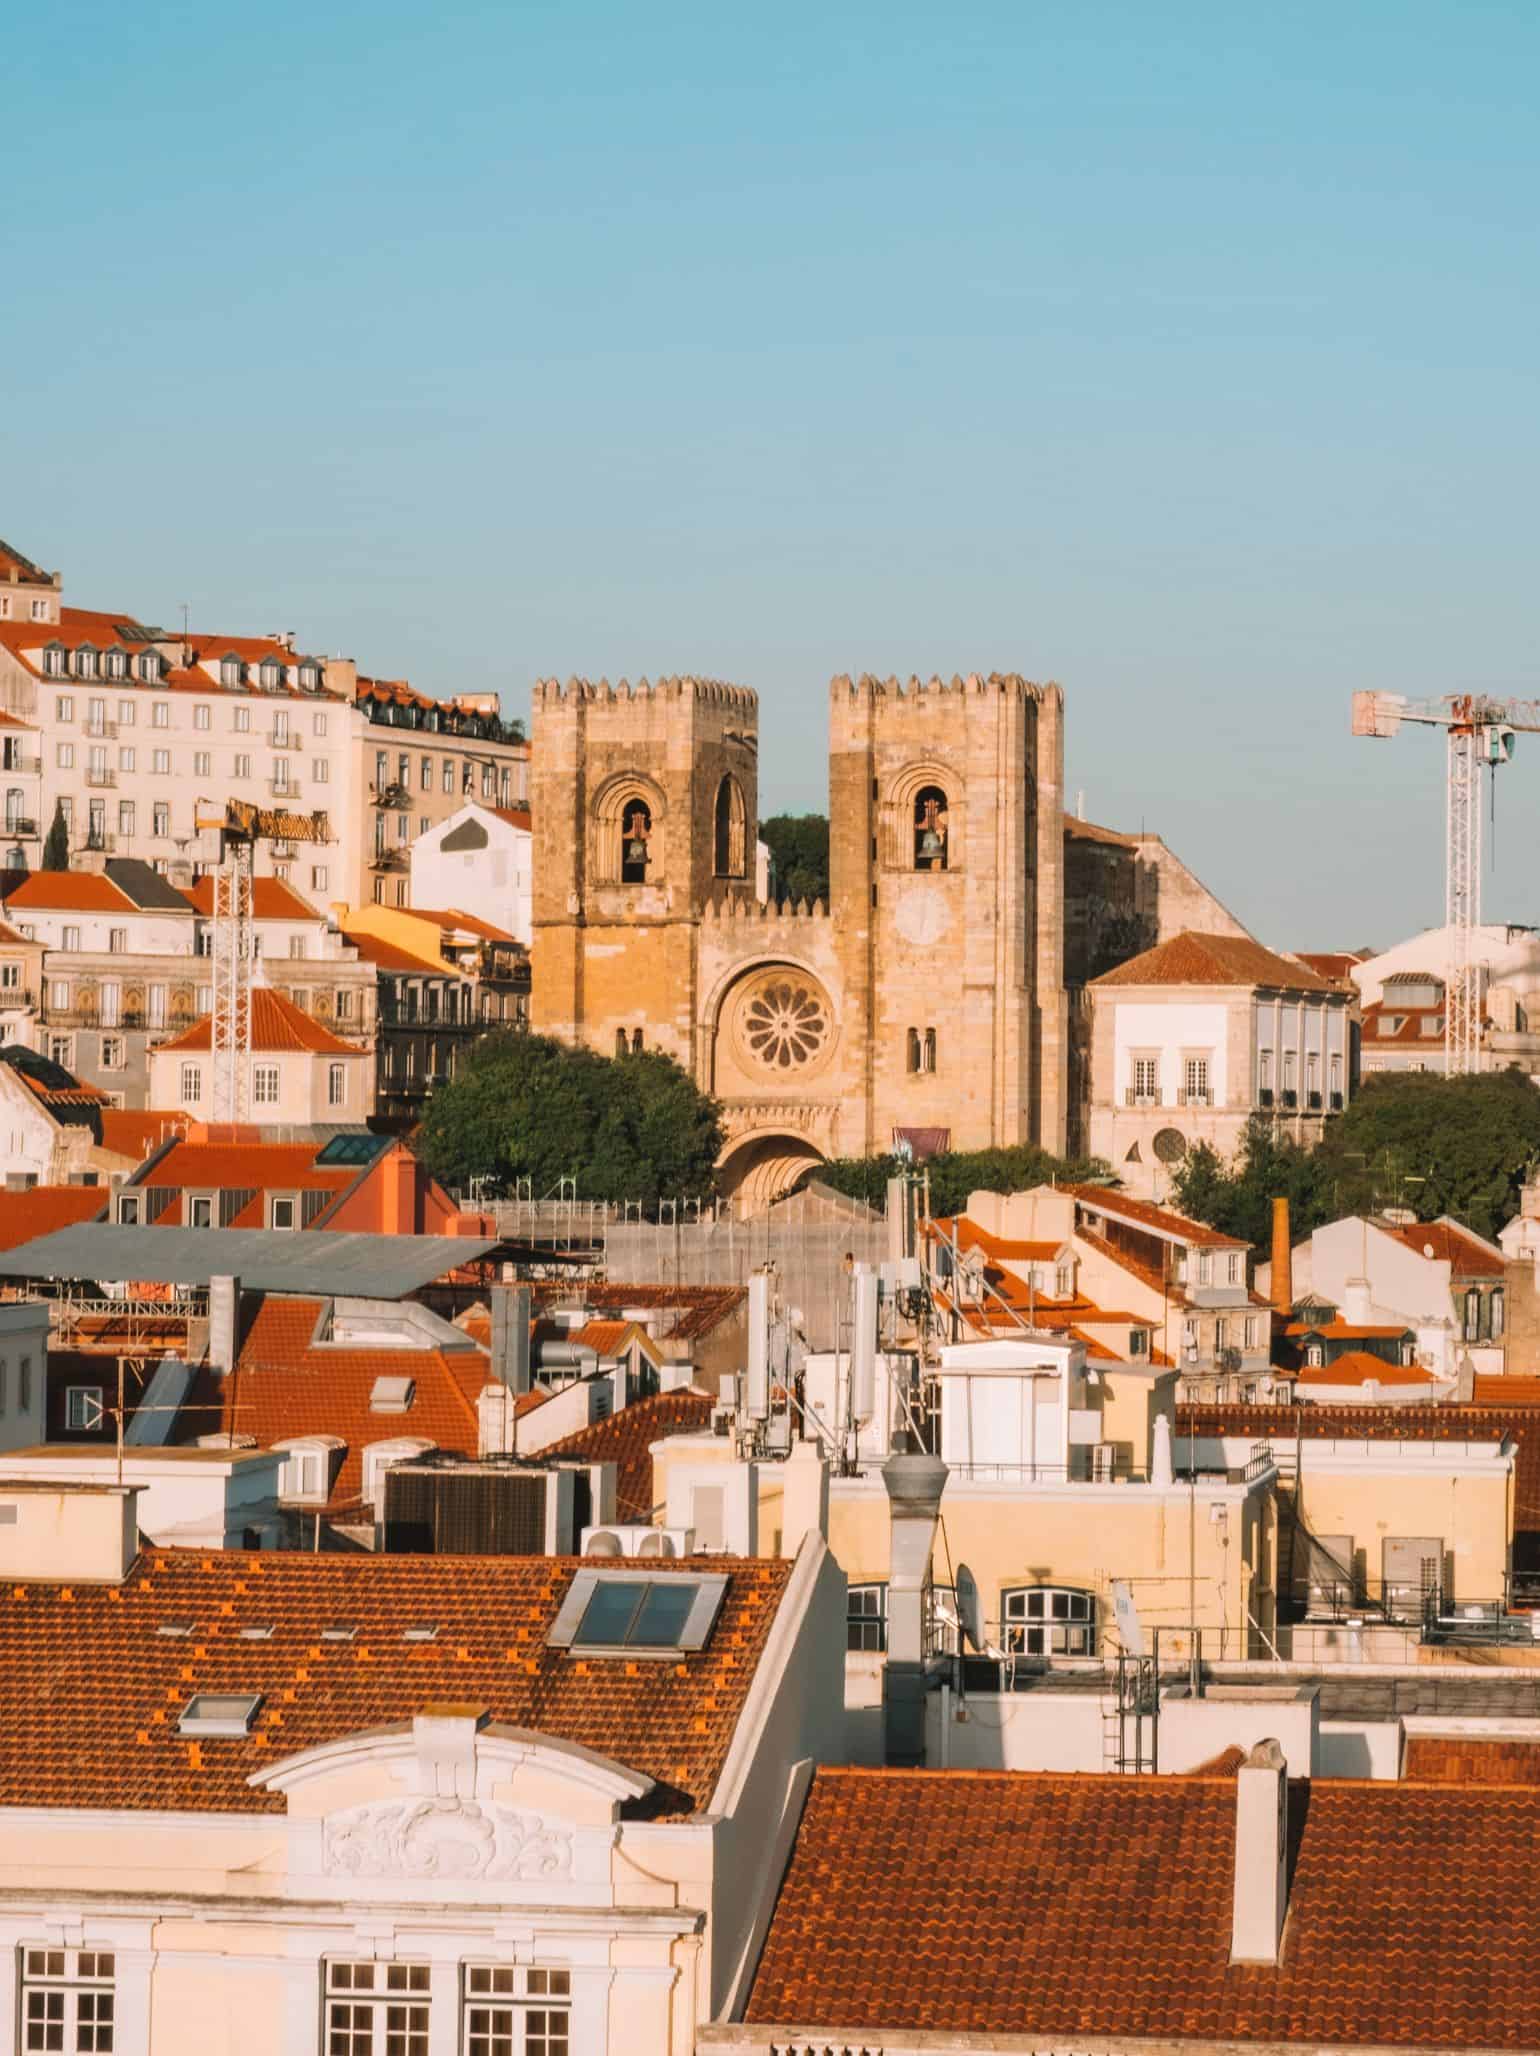 Views of the Sé Cathedral. Is Lisbon worth visiting? The historic monuments are one of the top reasons why it is!